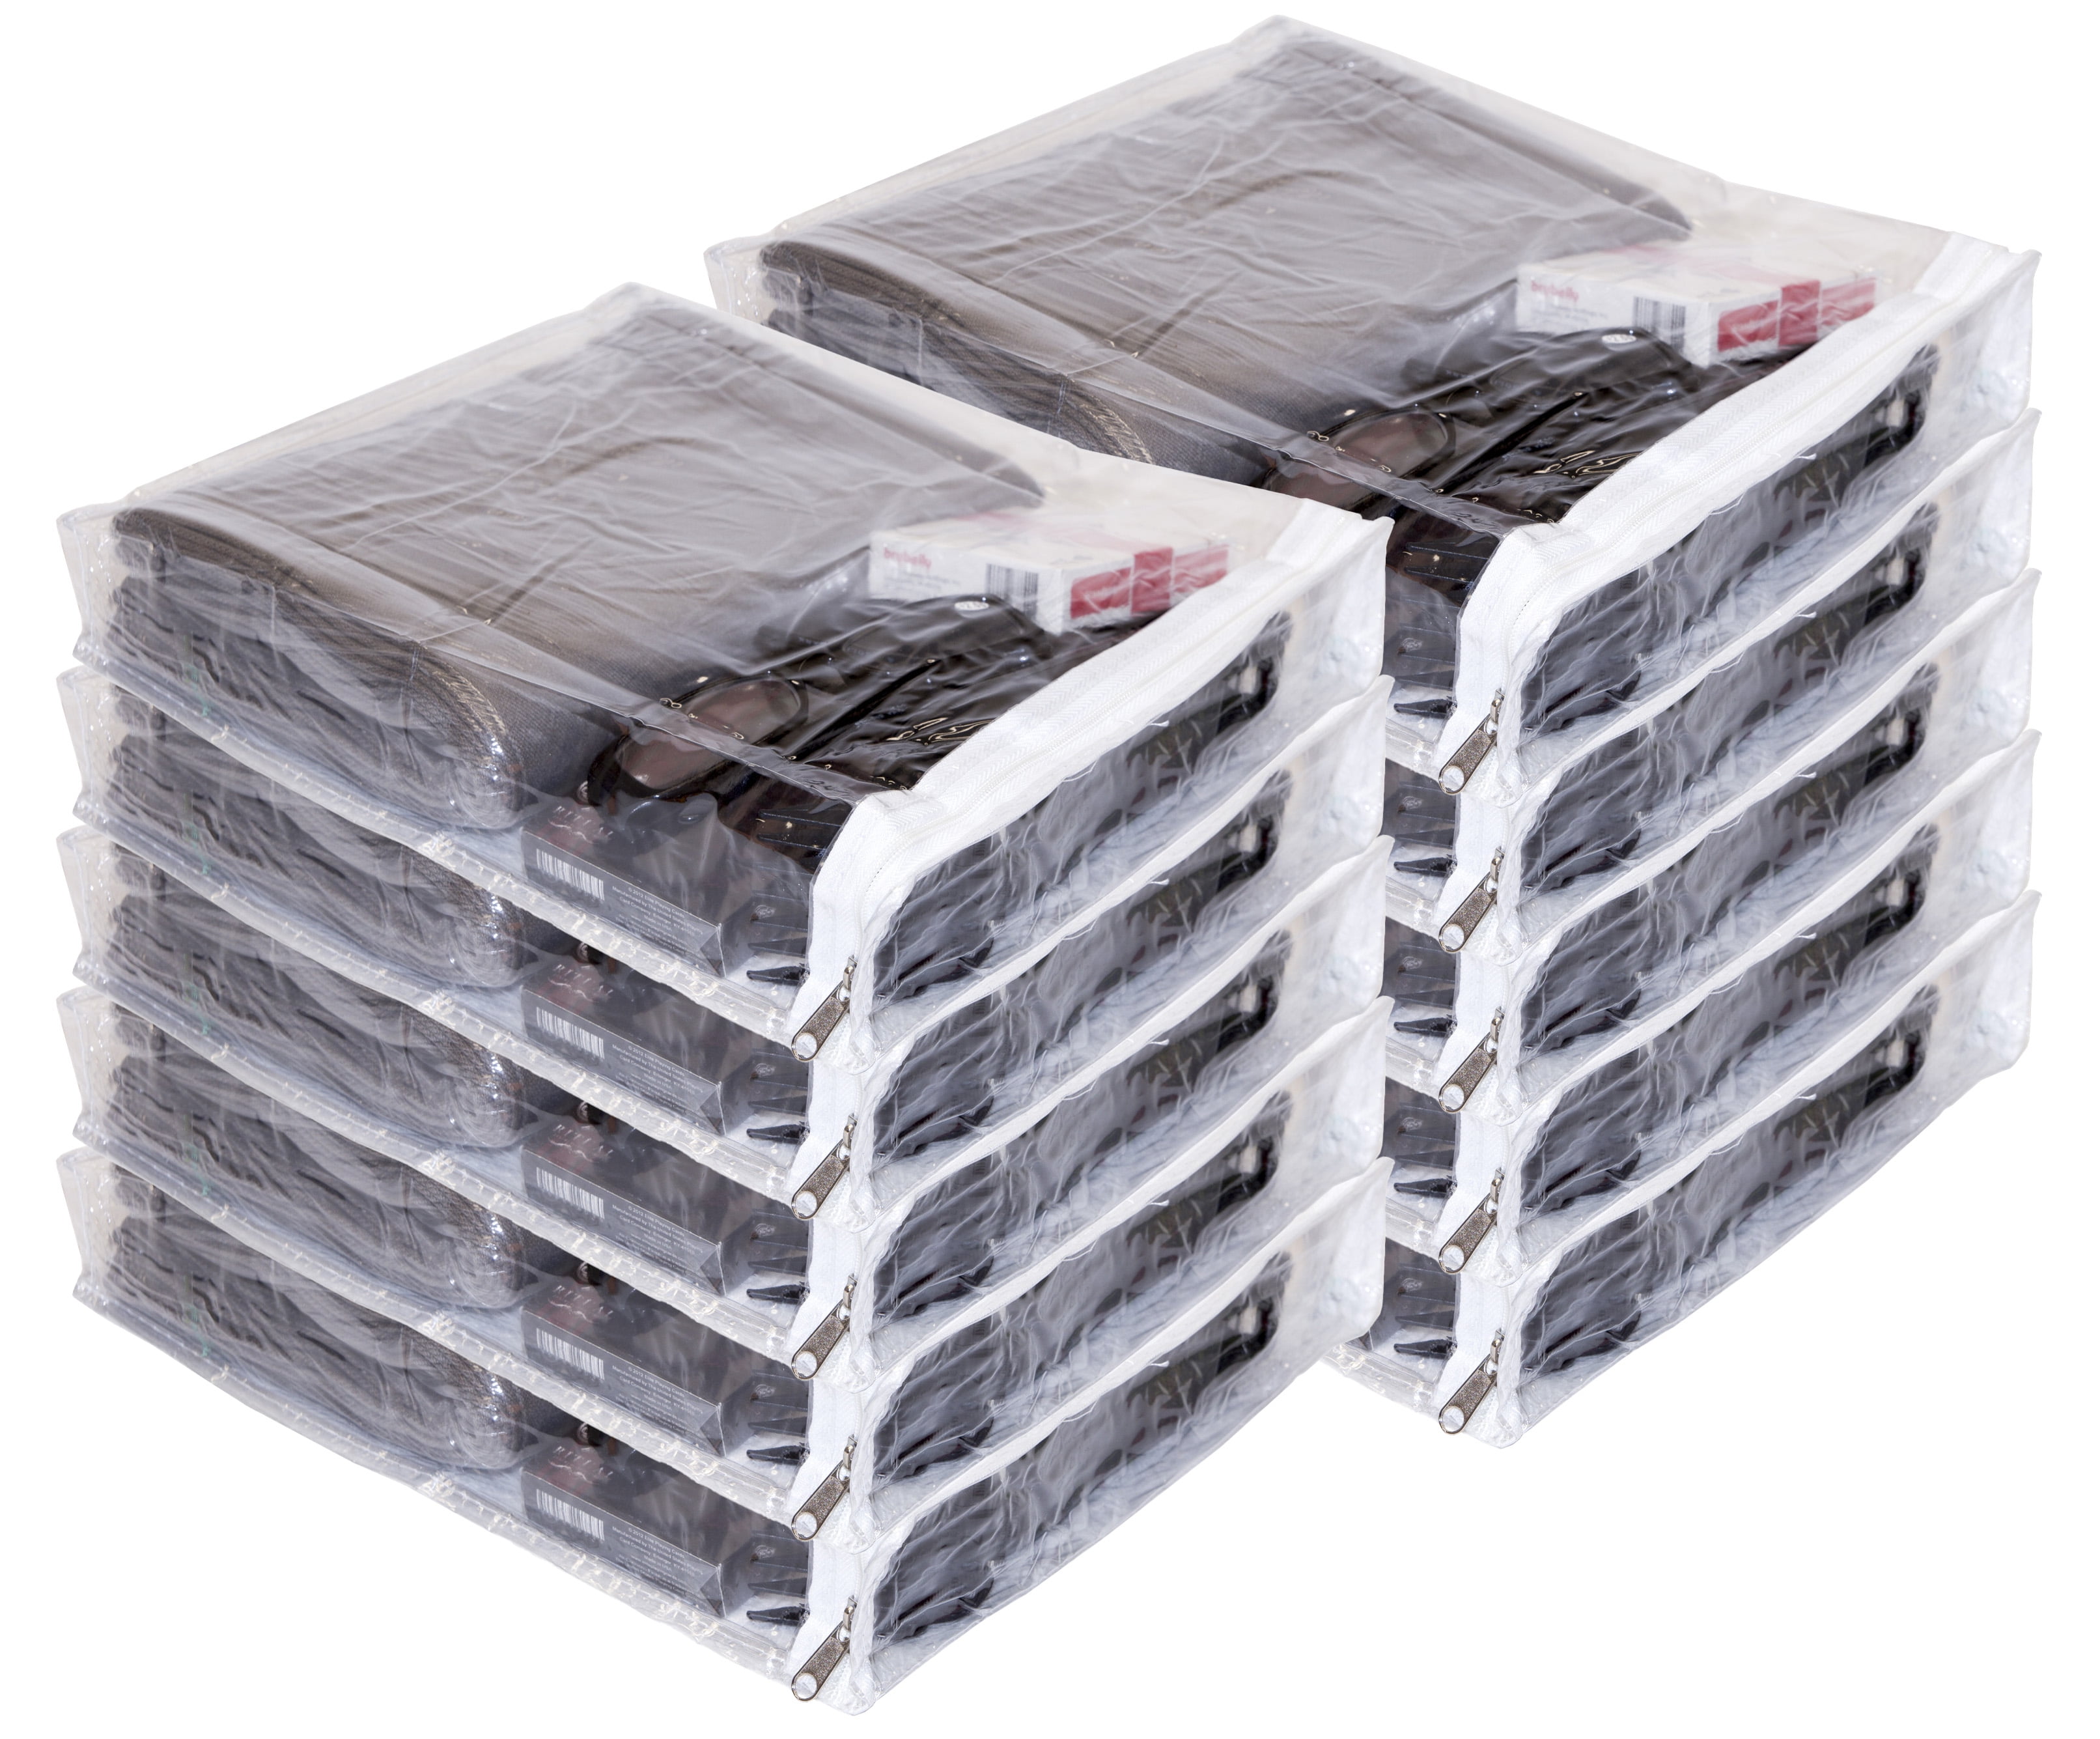 FBA Clear Vinyl Zippered Storage Bags 24x20x11 inch Set of 5